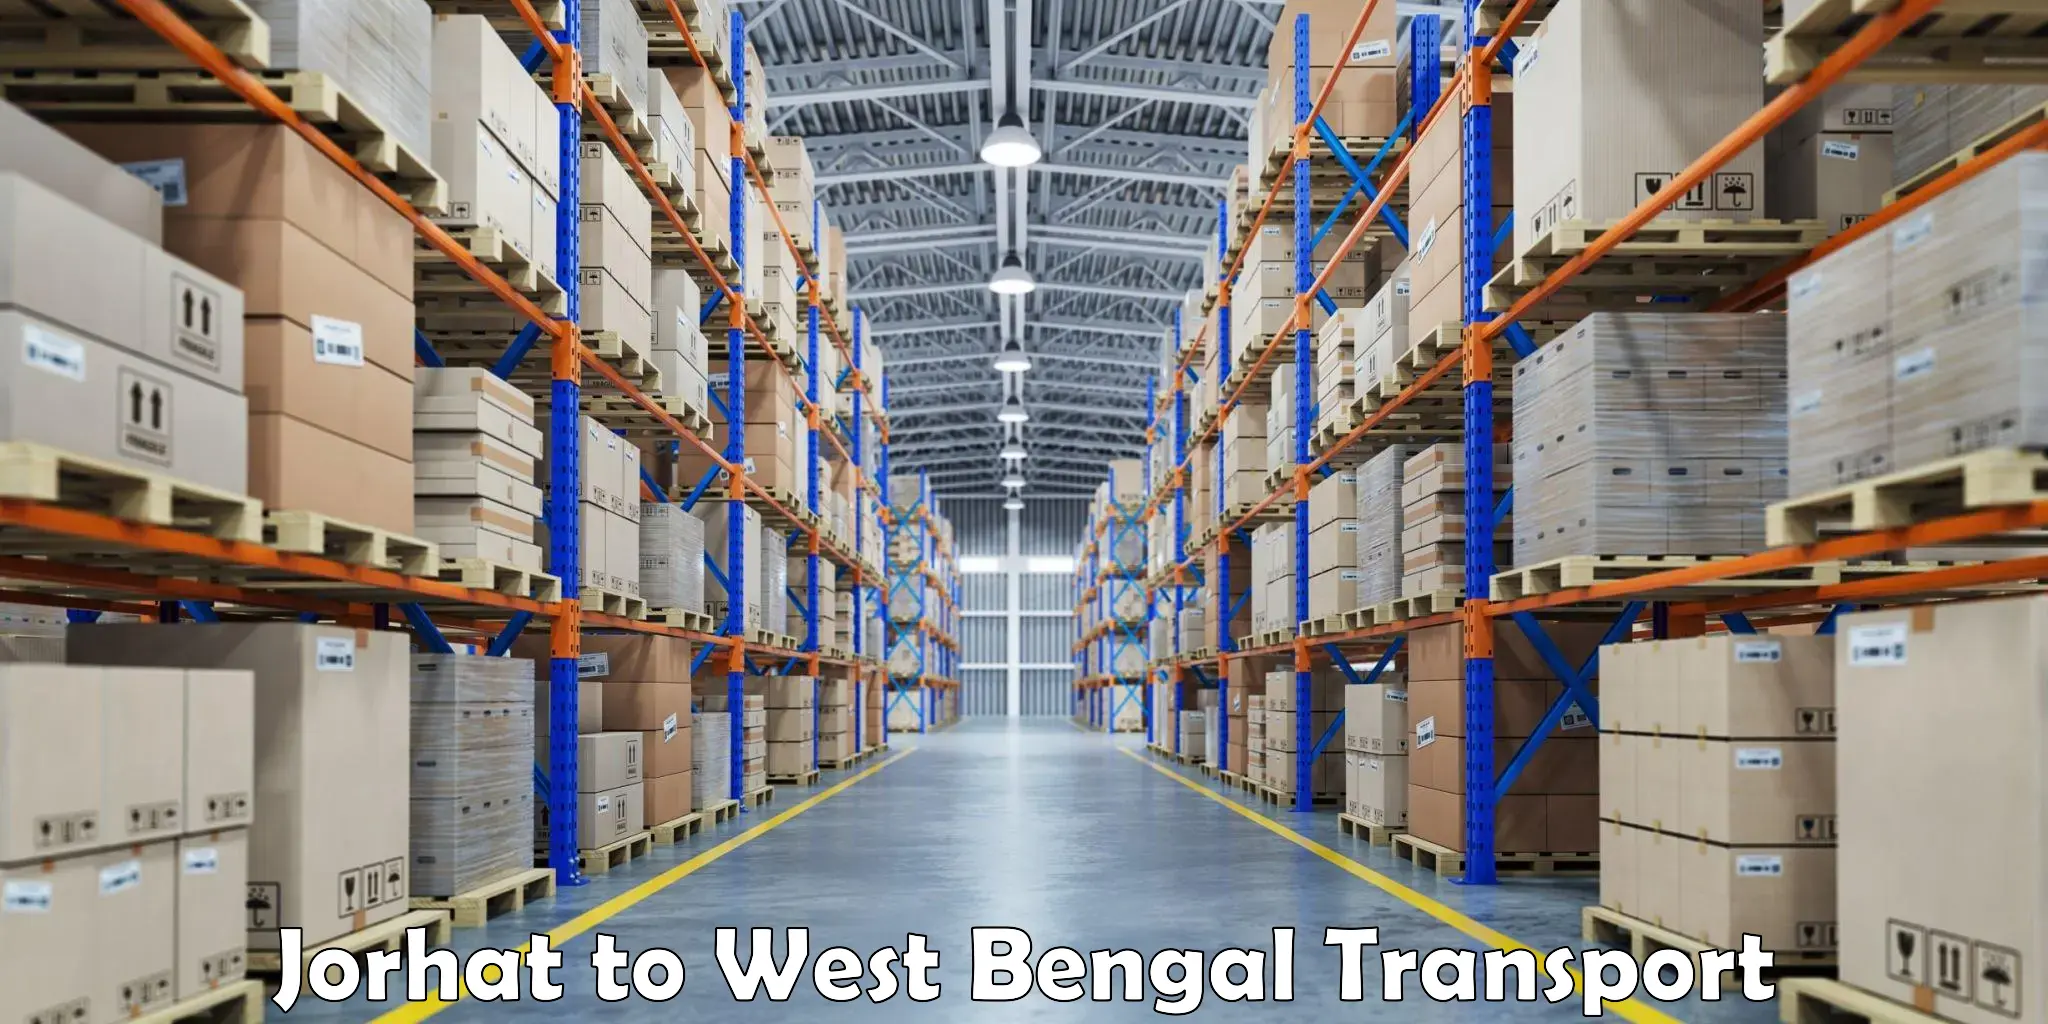 Express transport services in Jorhat to West Bengal